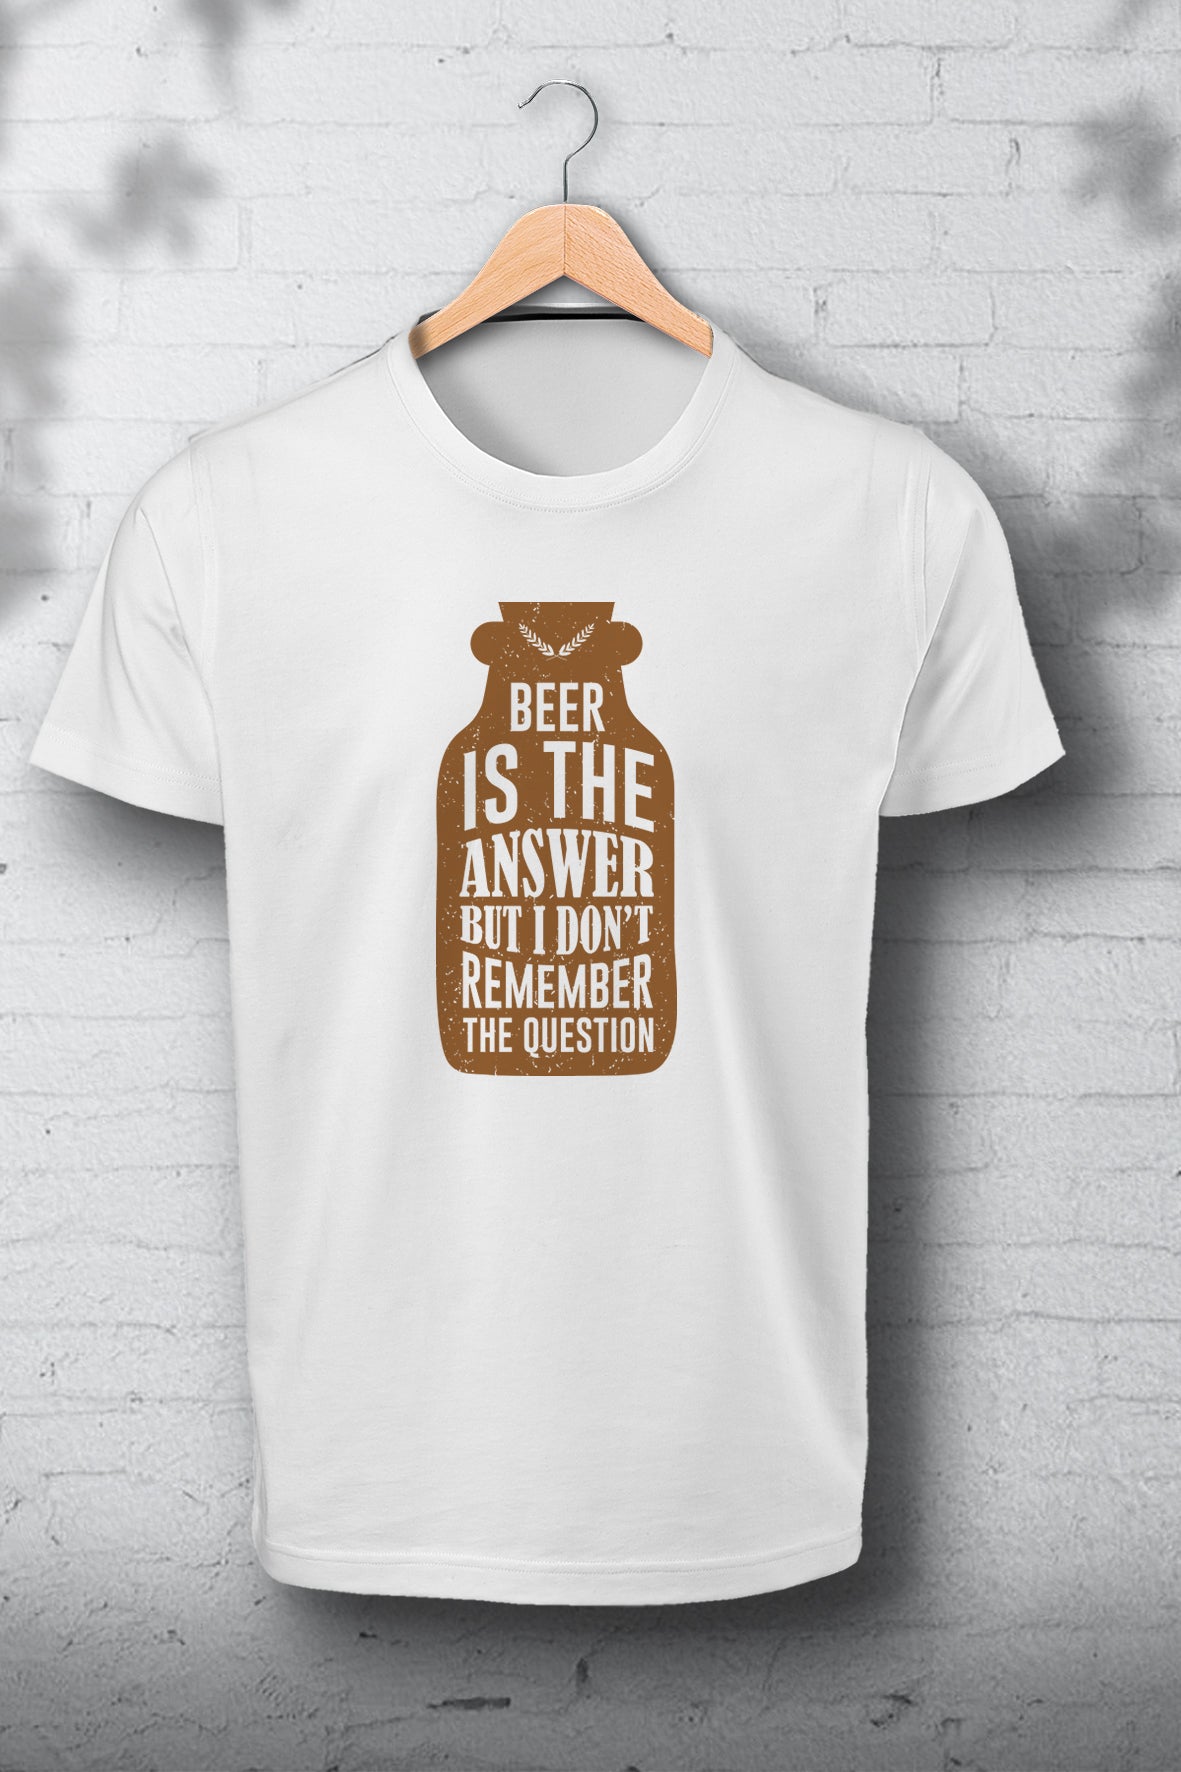 BEER IS THE ANSWER BUT...